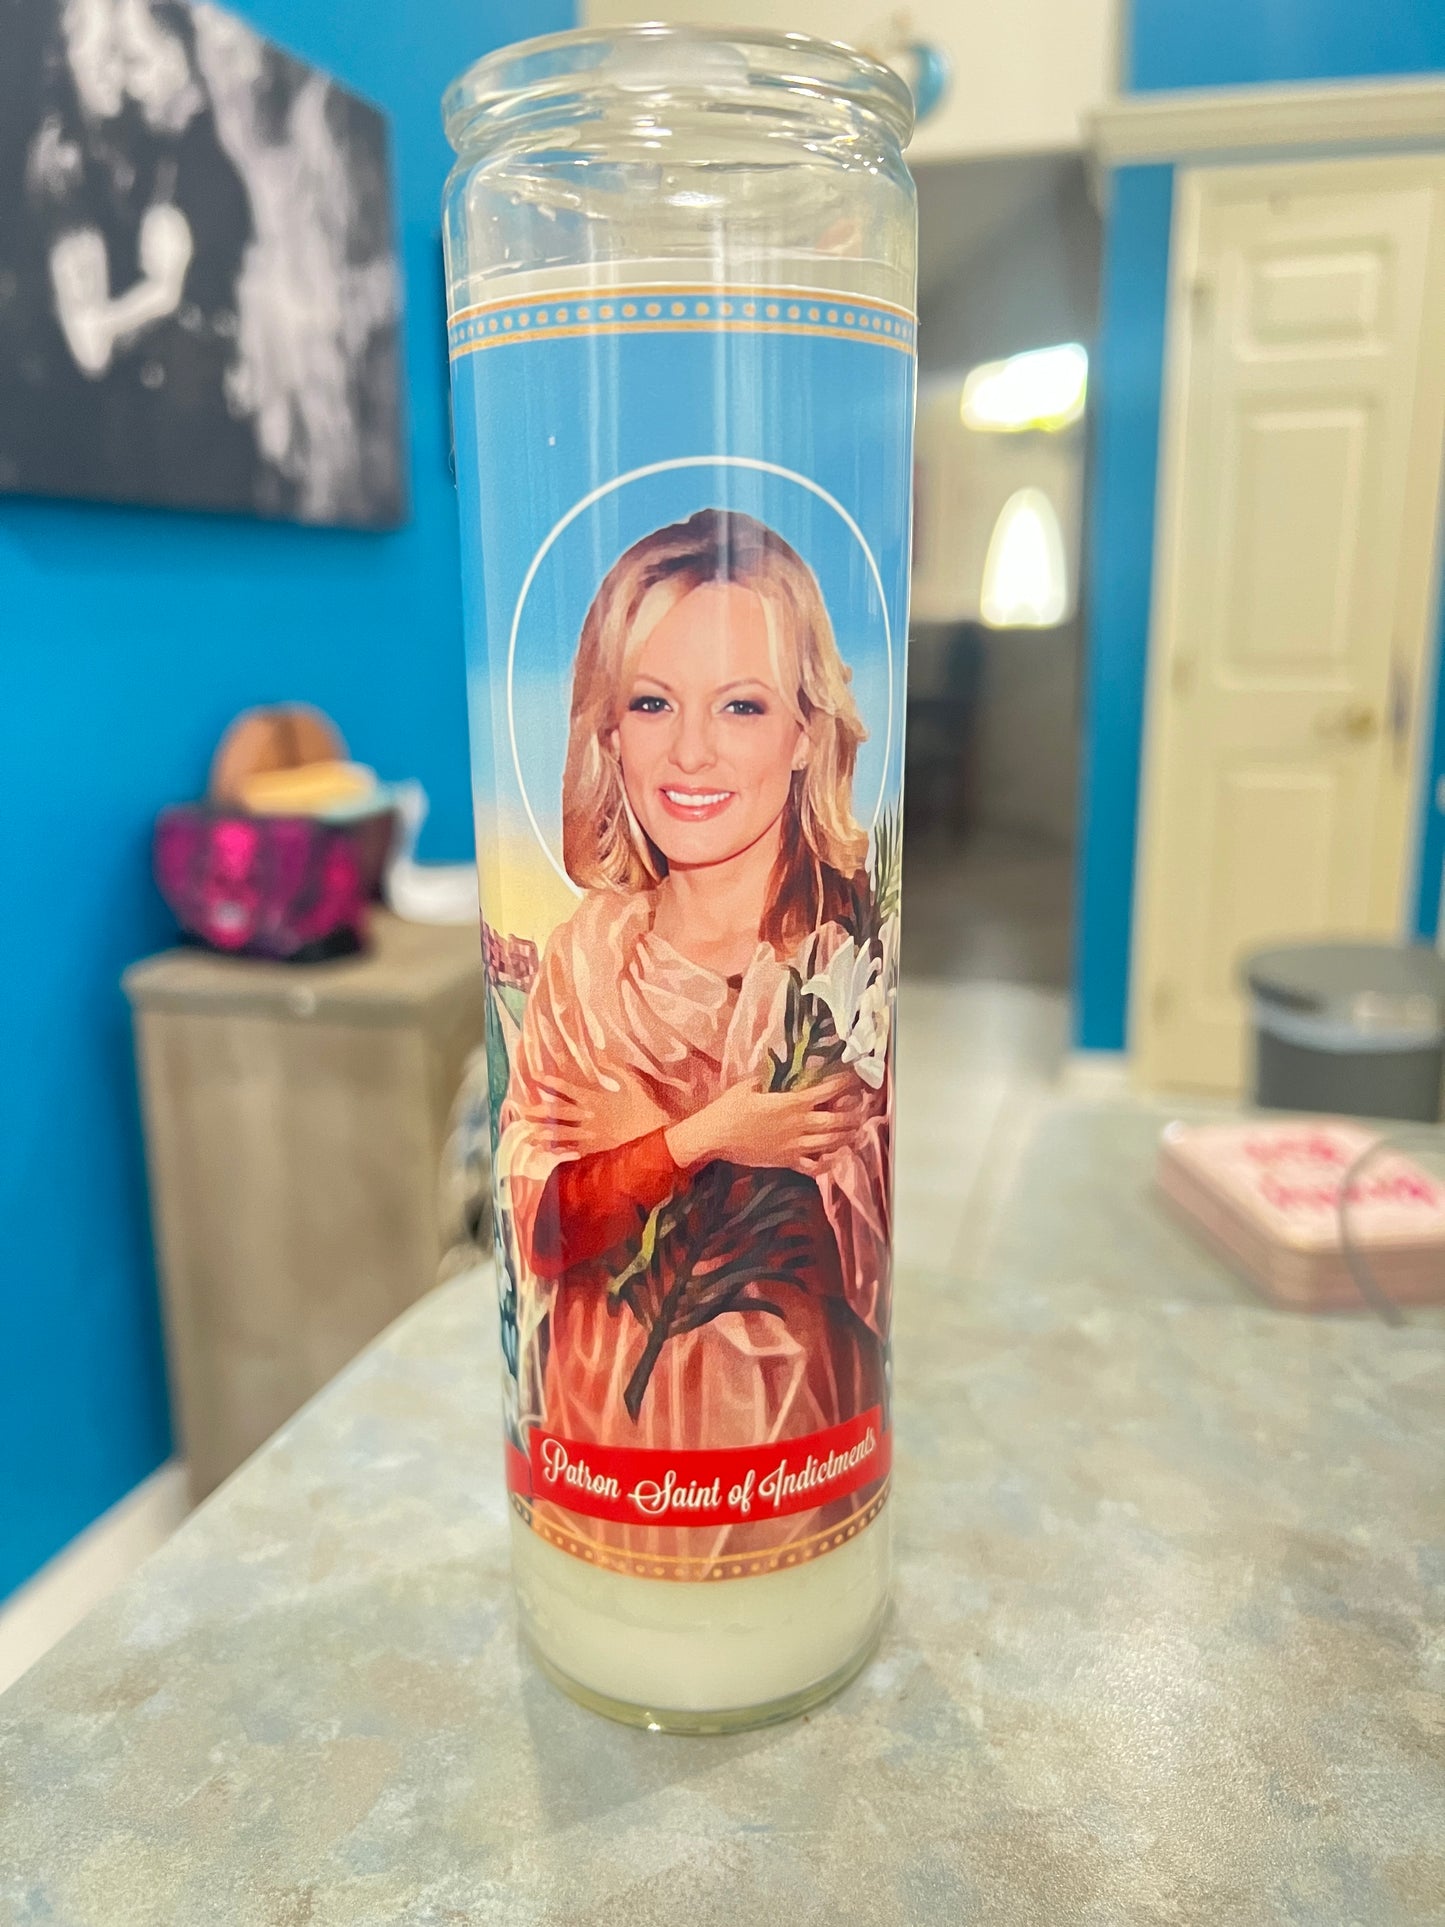 Stormy Saint of Indictments candle